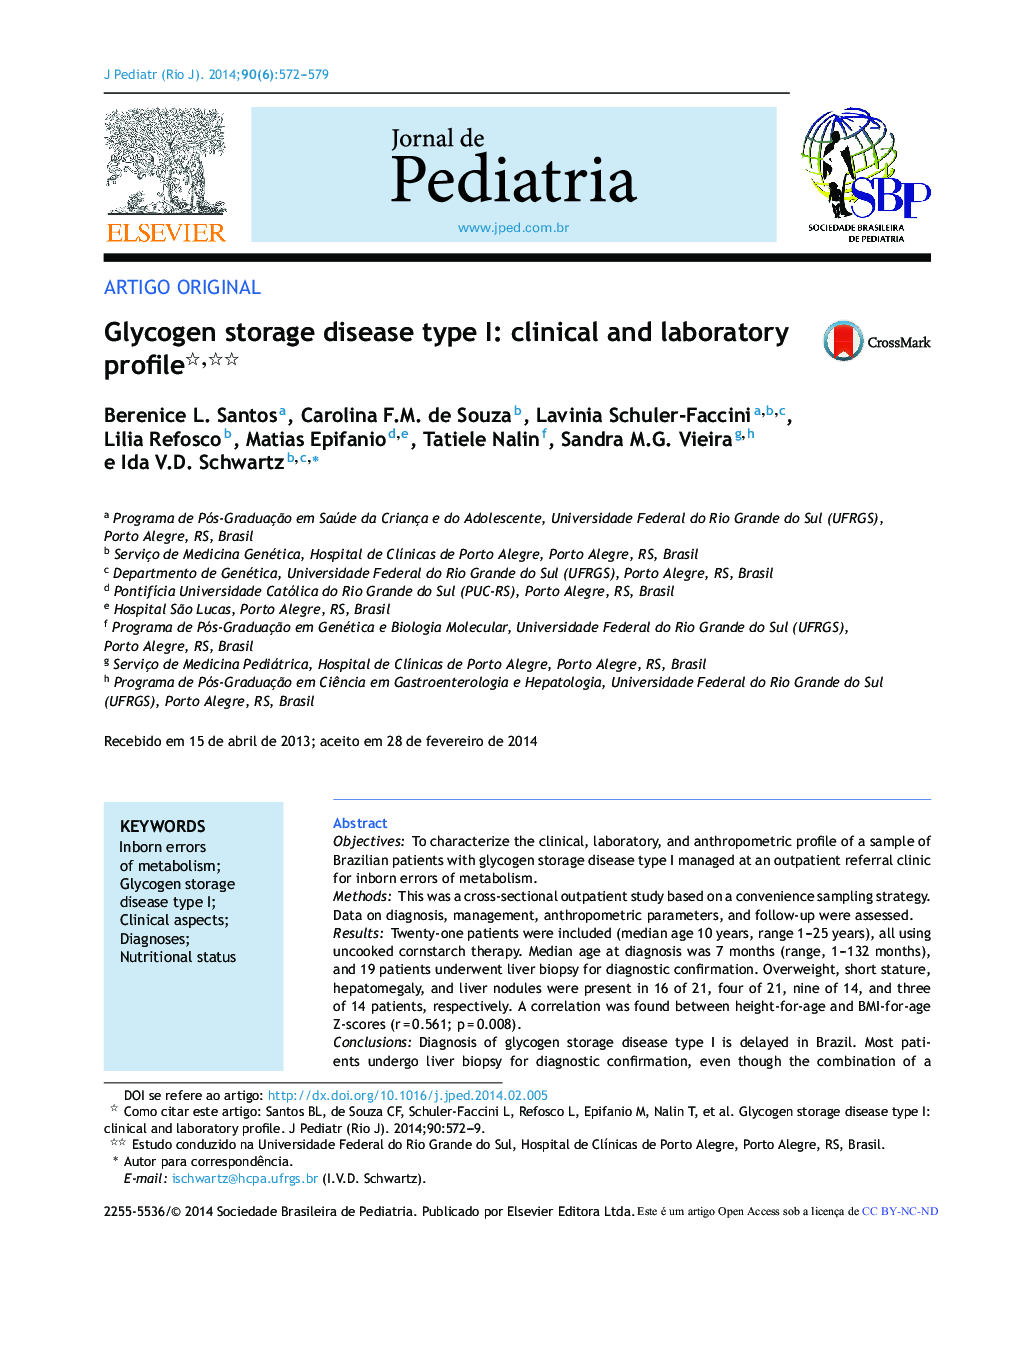 Glycogen storage disease type I: clinical and laboratory profile 